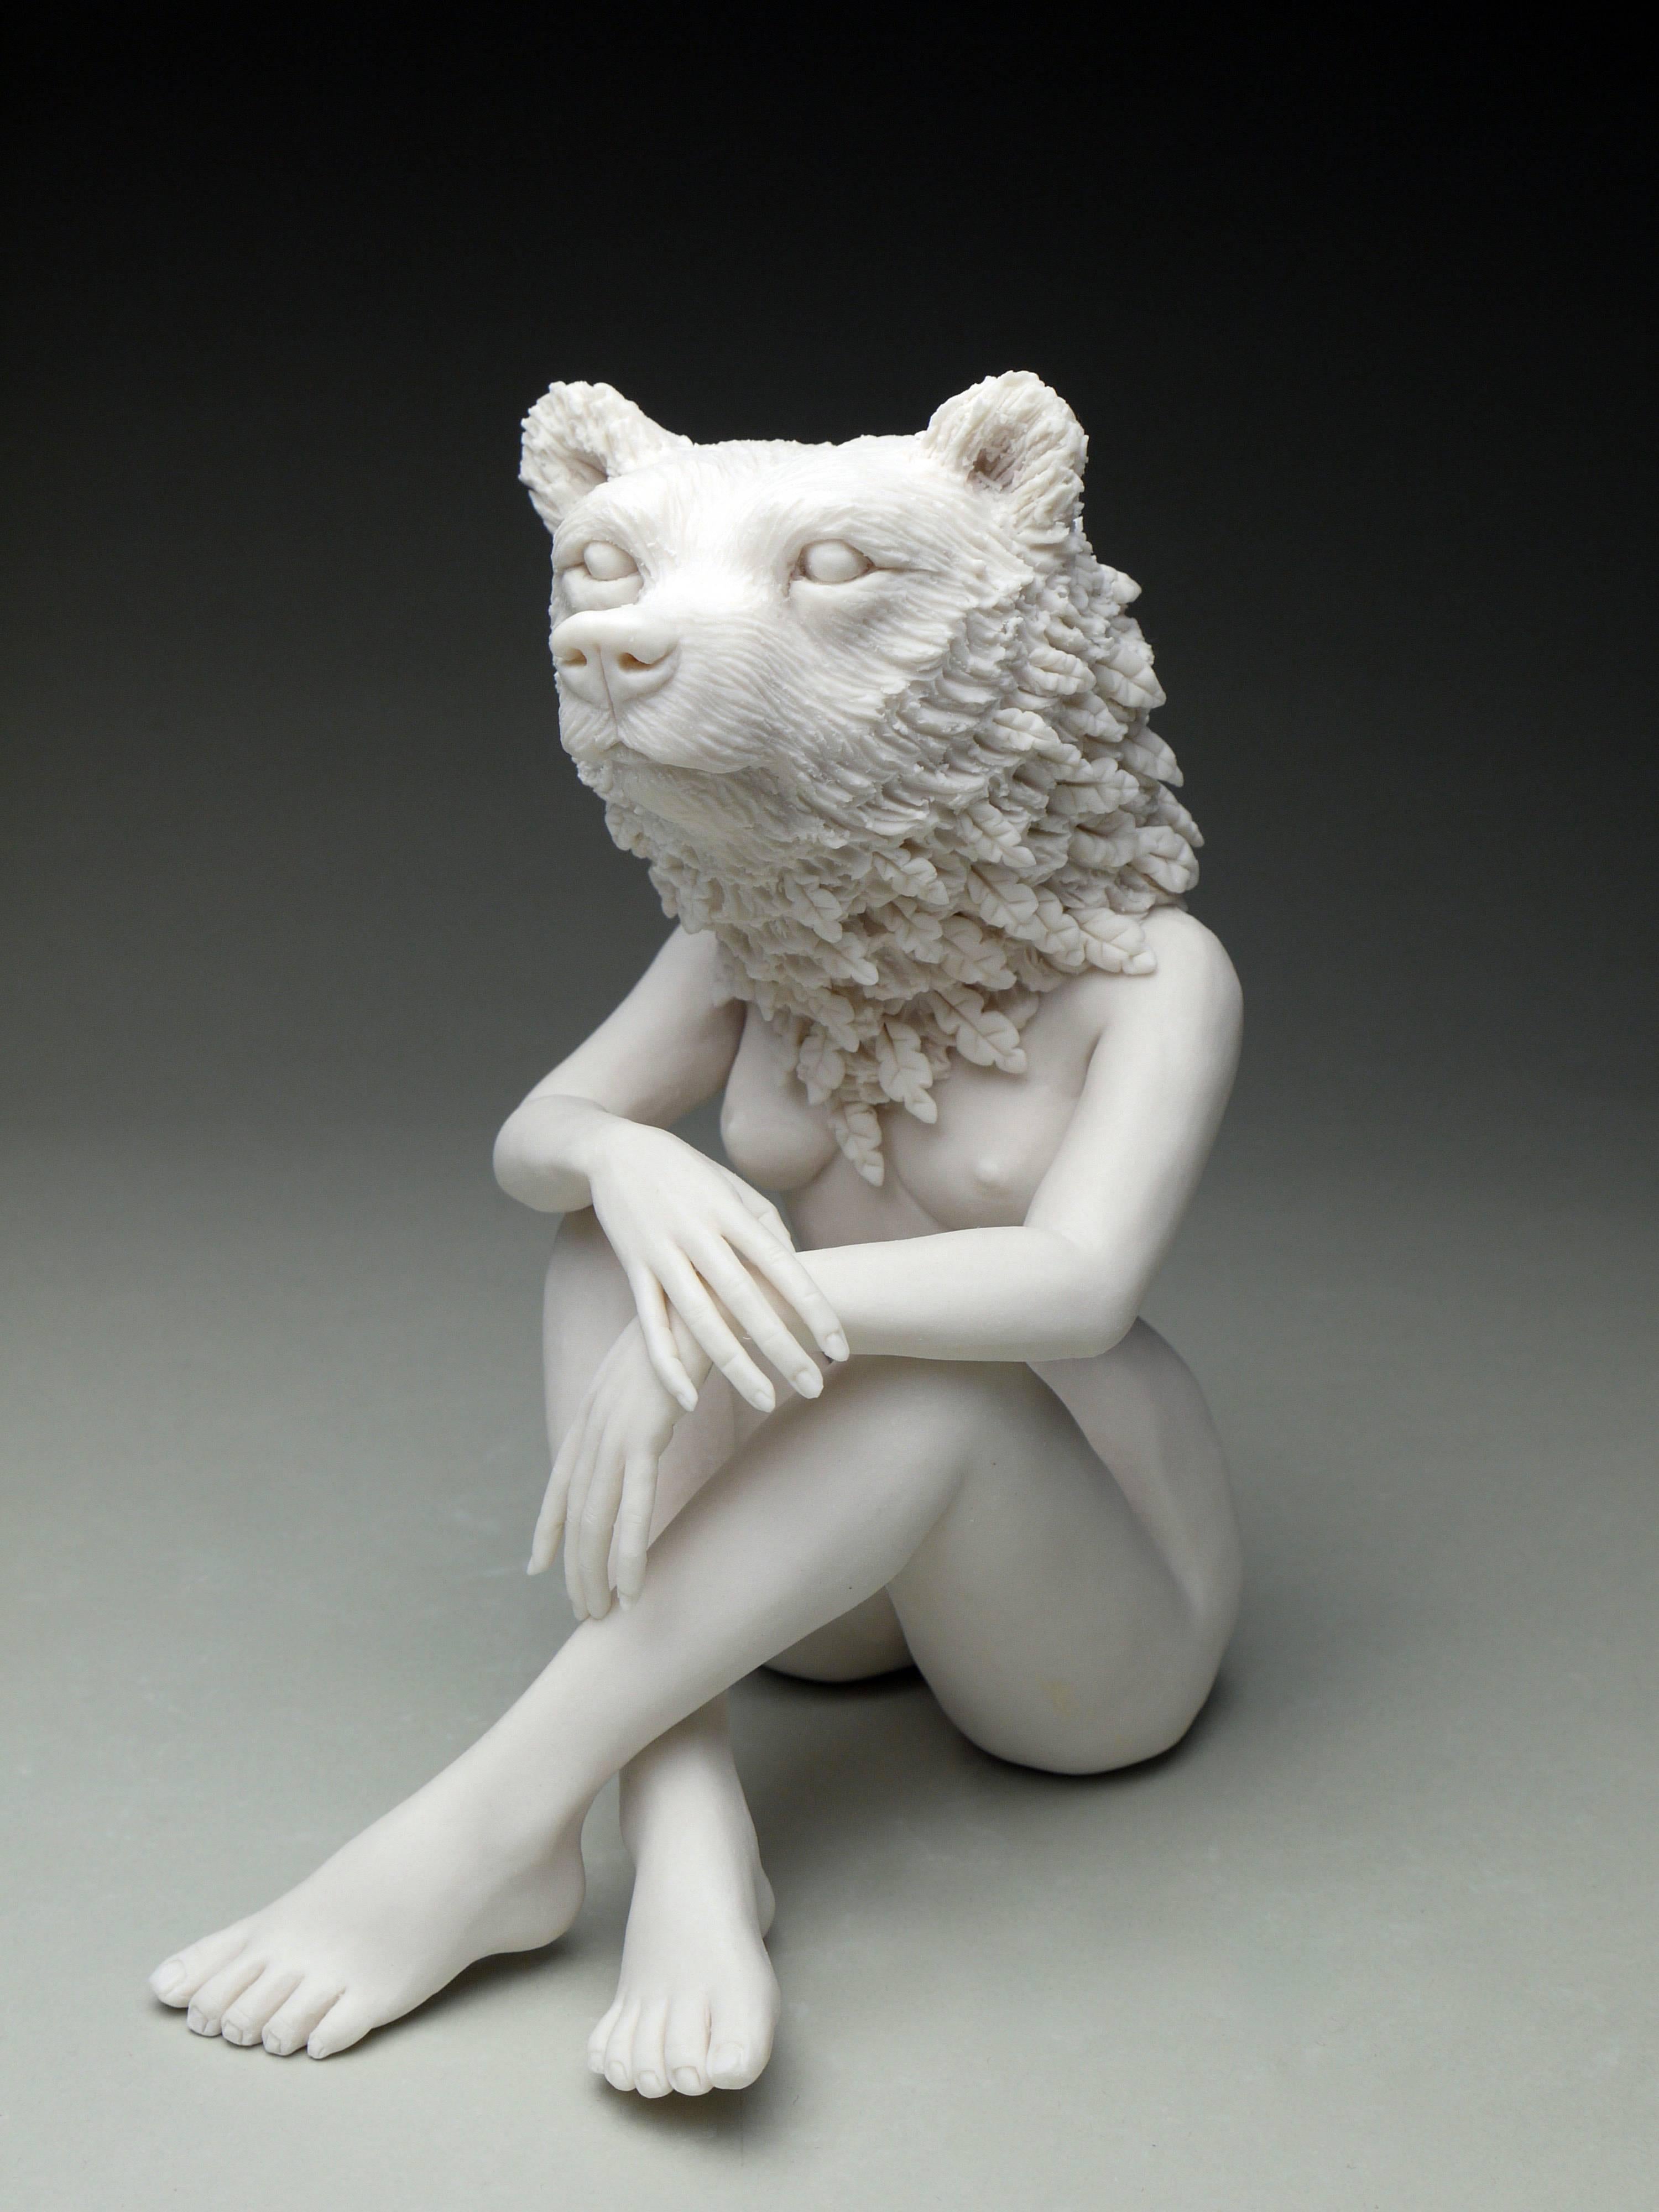 Crystal Morey Nude Sculpture - "New Symbiosis: Brown Bear with New Growth", Hand Sculpted Porcelain Figure